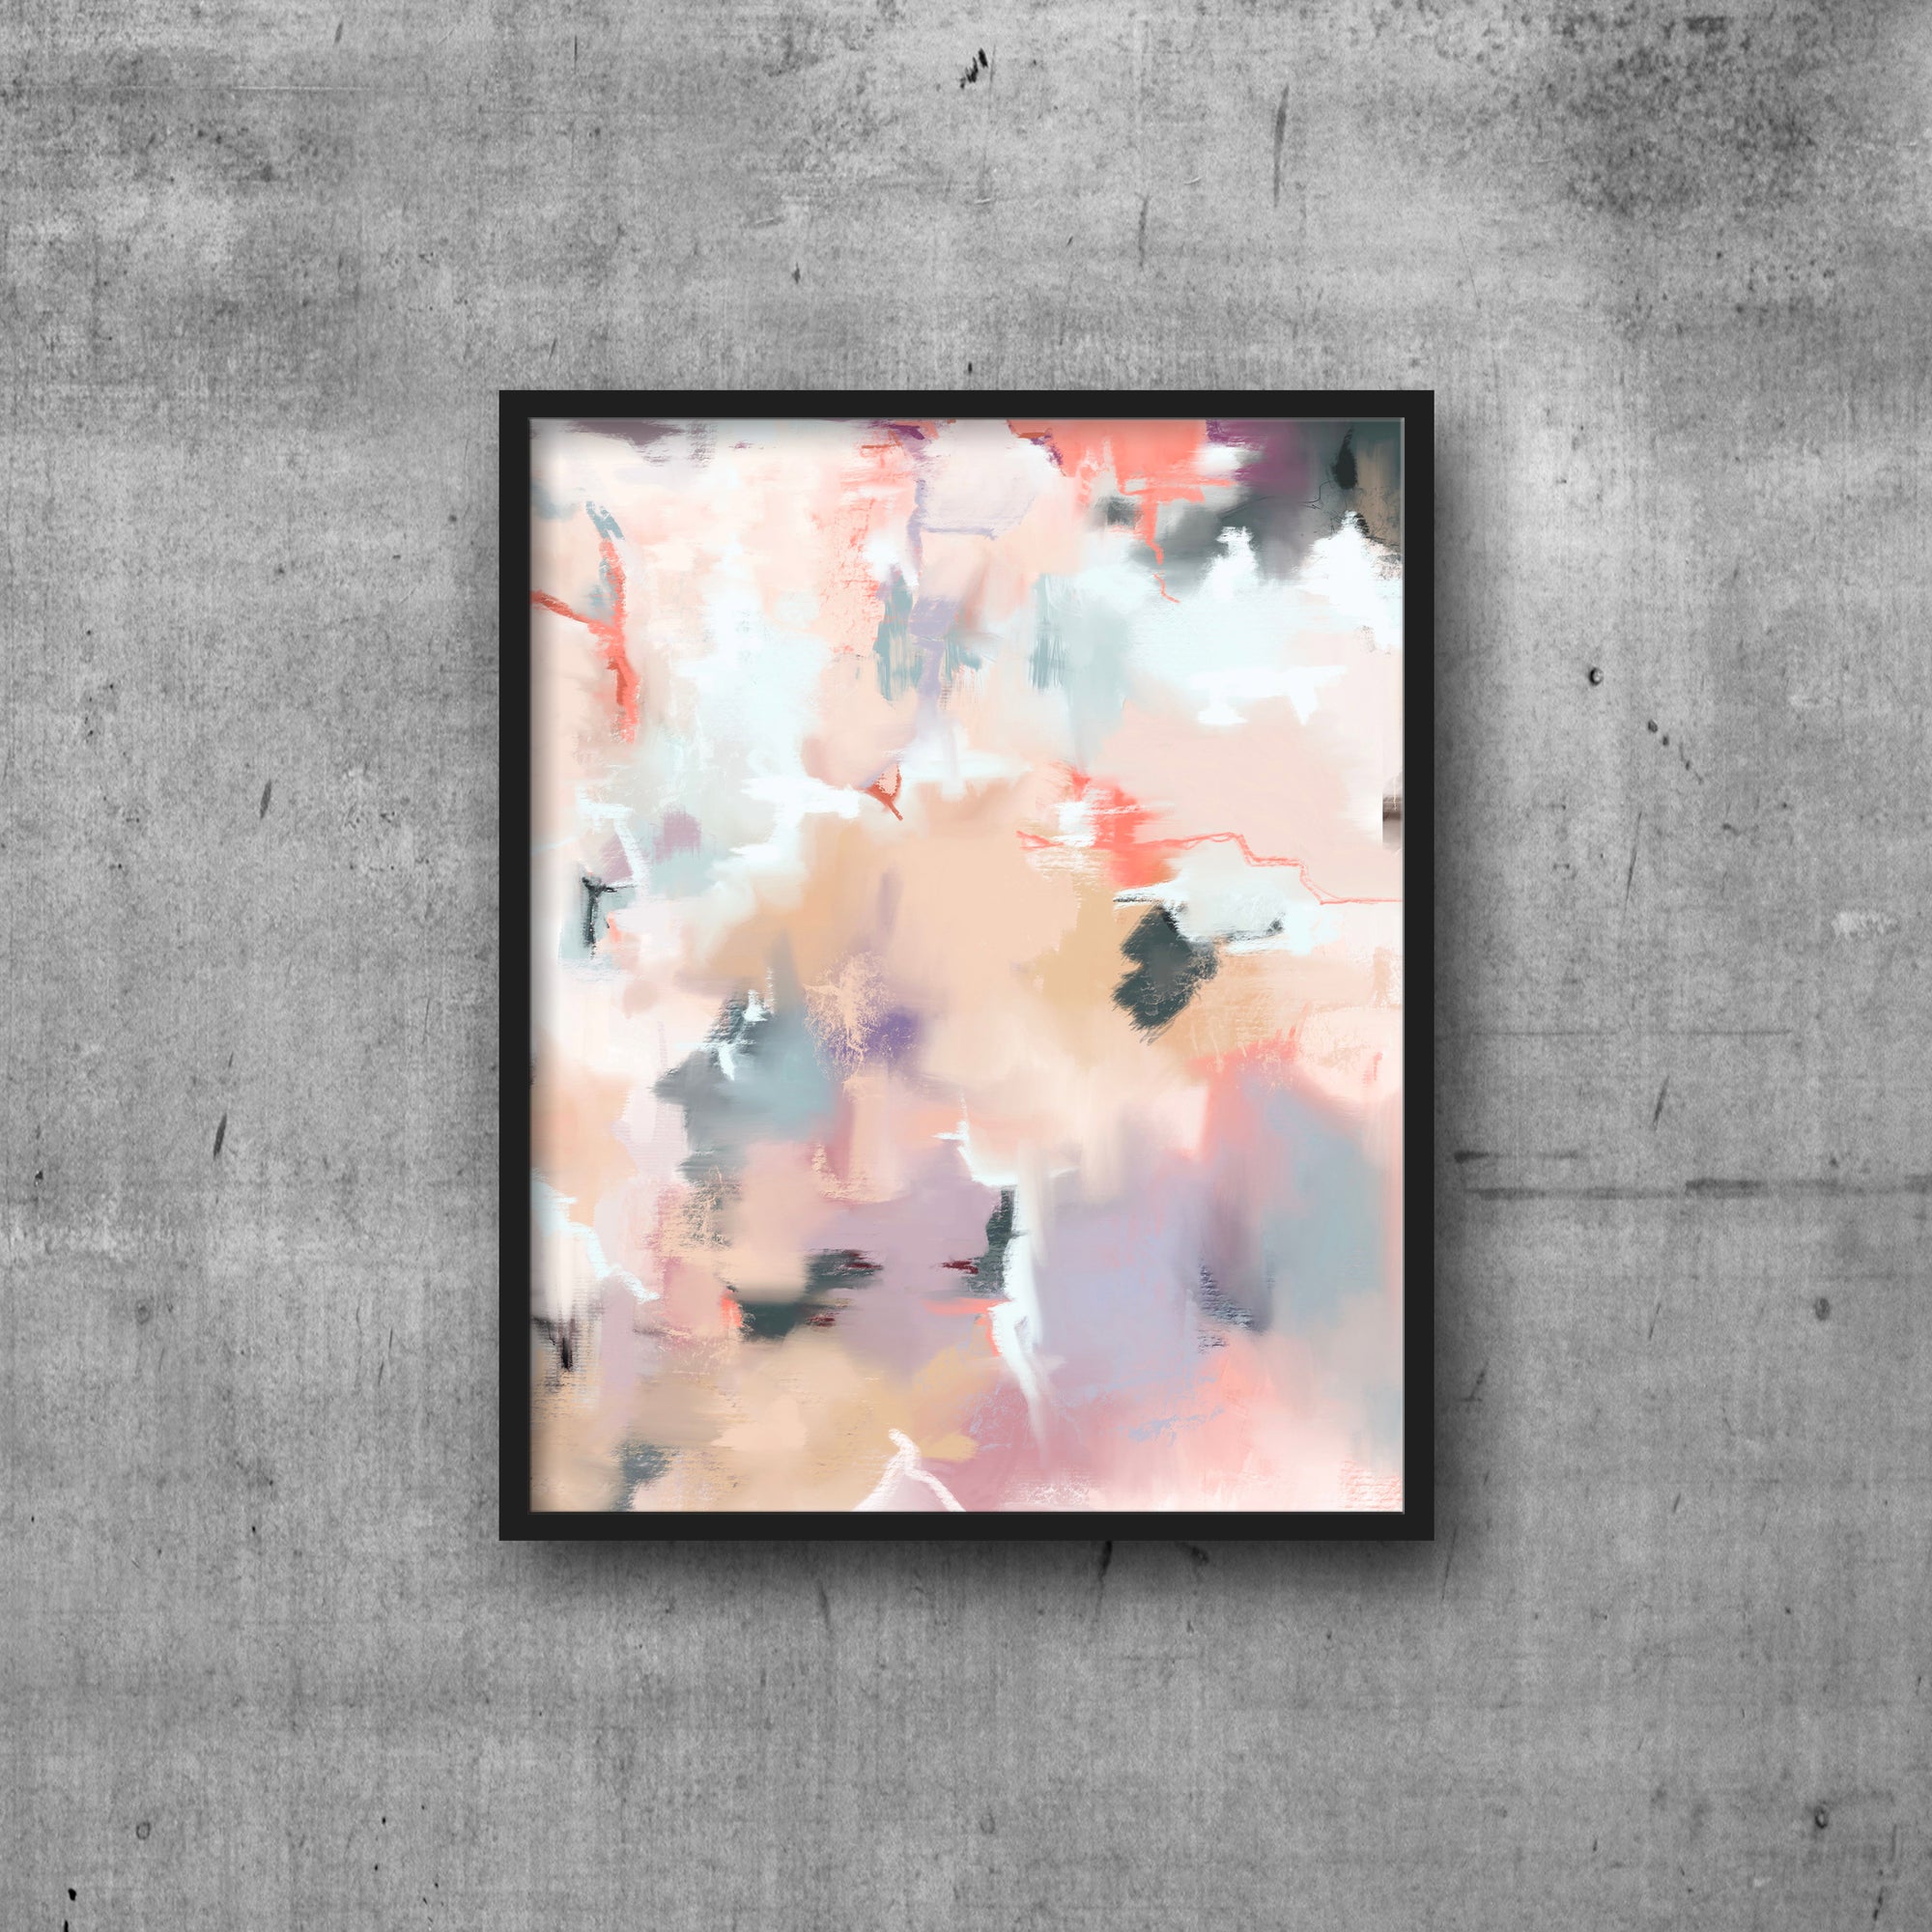 Abstract art print in shades of tan, coral, peach, mauve, ice blue and lilac hanging on clips